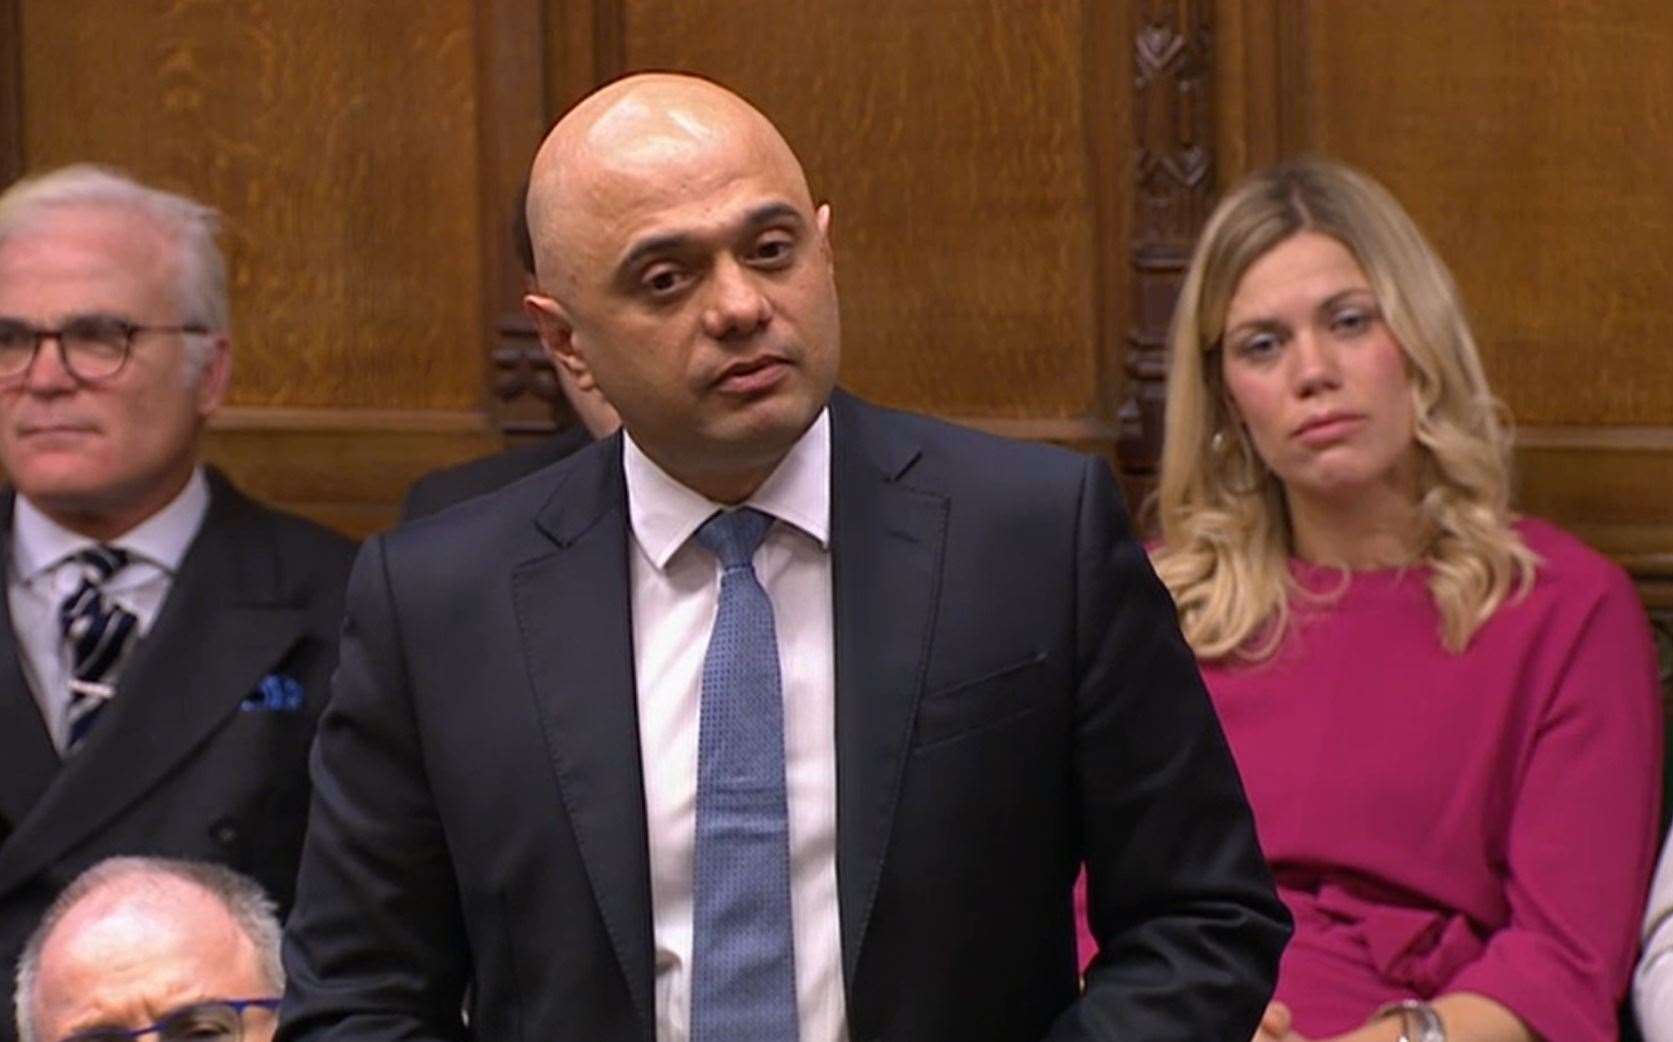 JP Morgan says no privileged information from Sajid Javid’s time in office will be used in his new role (House of Commons/PA)